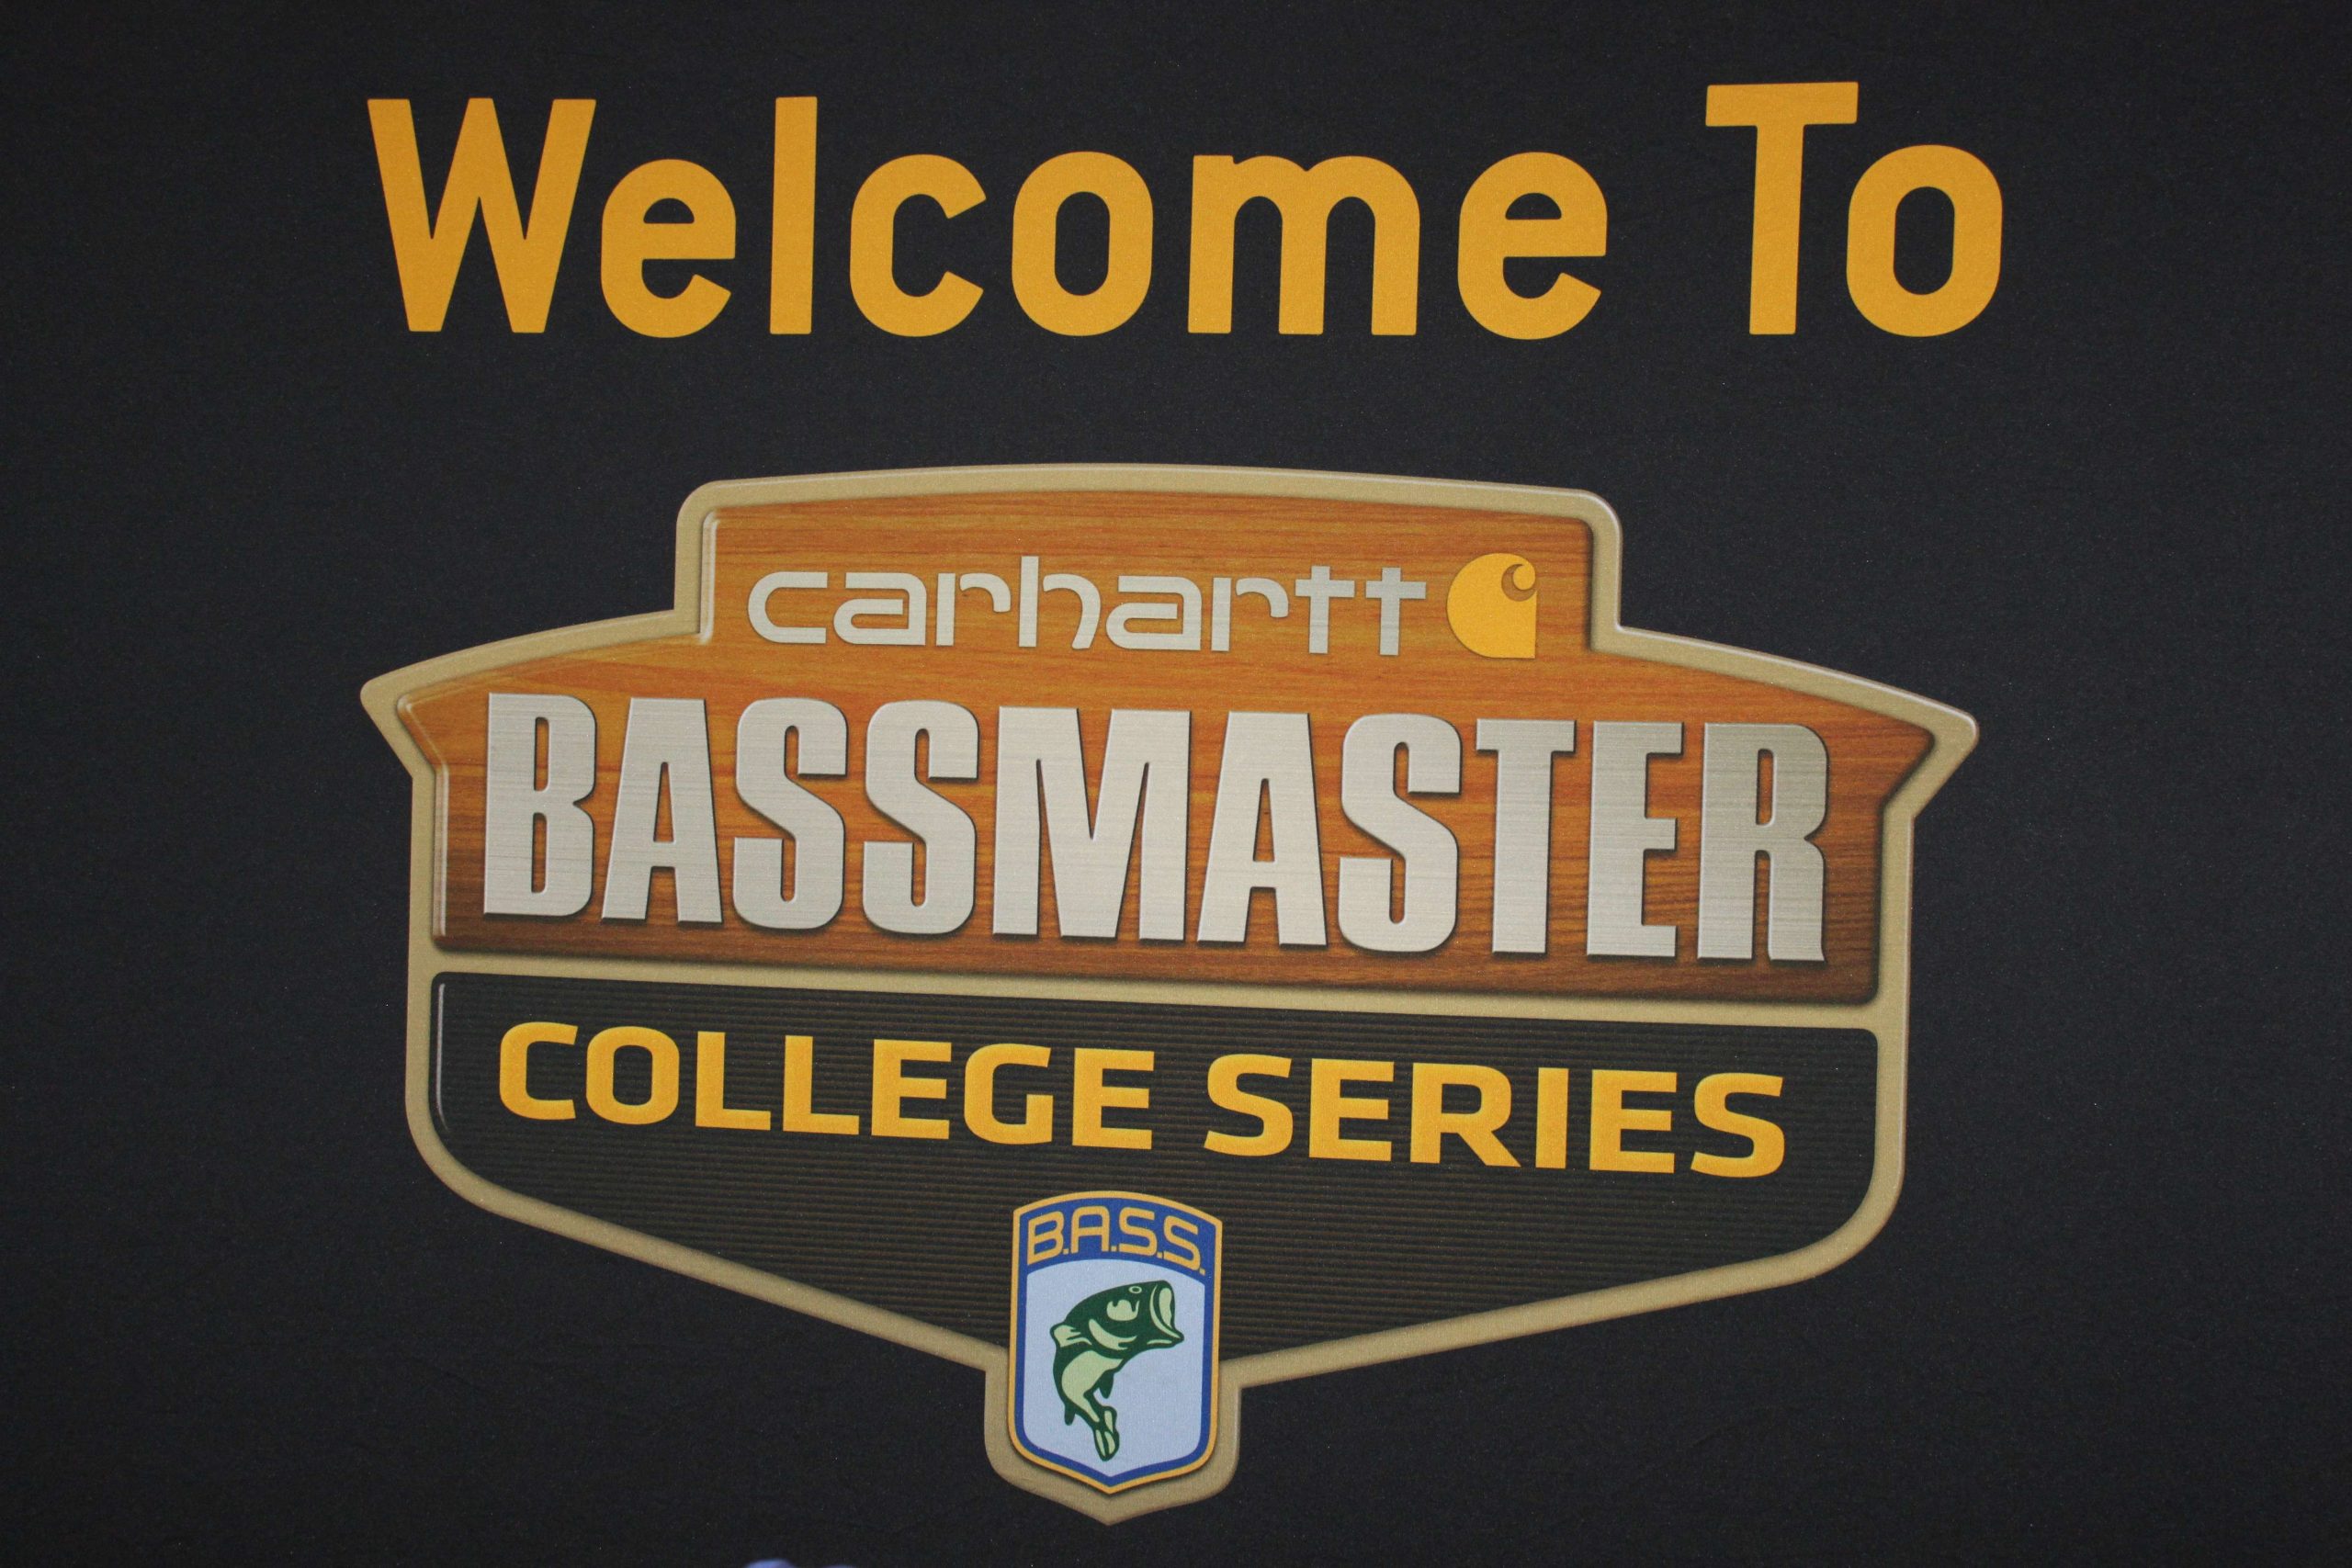 Registration for the 2018 Carhartt College Eastern Tour presented by Bass Pro Shops began on Wednesday at Carson-Newman University in Jefferson City, Tenn. More than 300 college anglers from more than 100 colleges and universities from around the U.S. signed up to compete in the third of four regular-season college events scheduled this year. Leading duos will compete in the College Series National Championship to be held July 19-21 in Oklahoma.